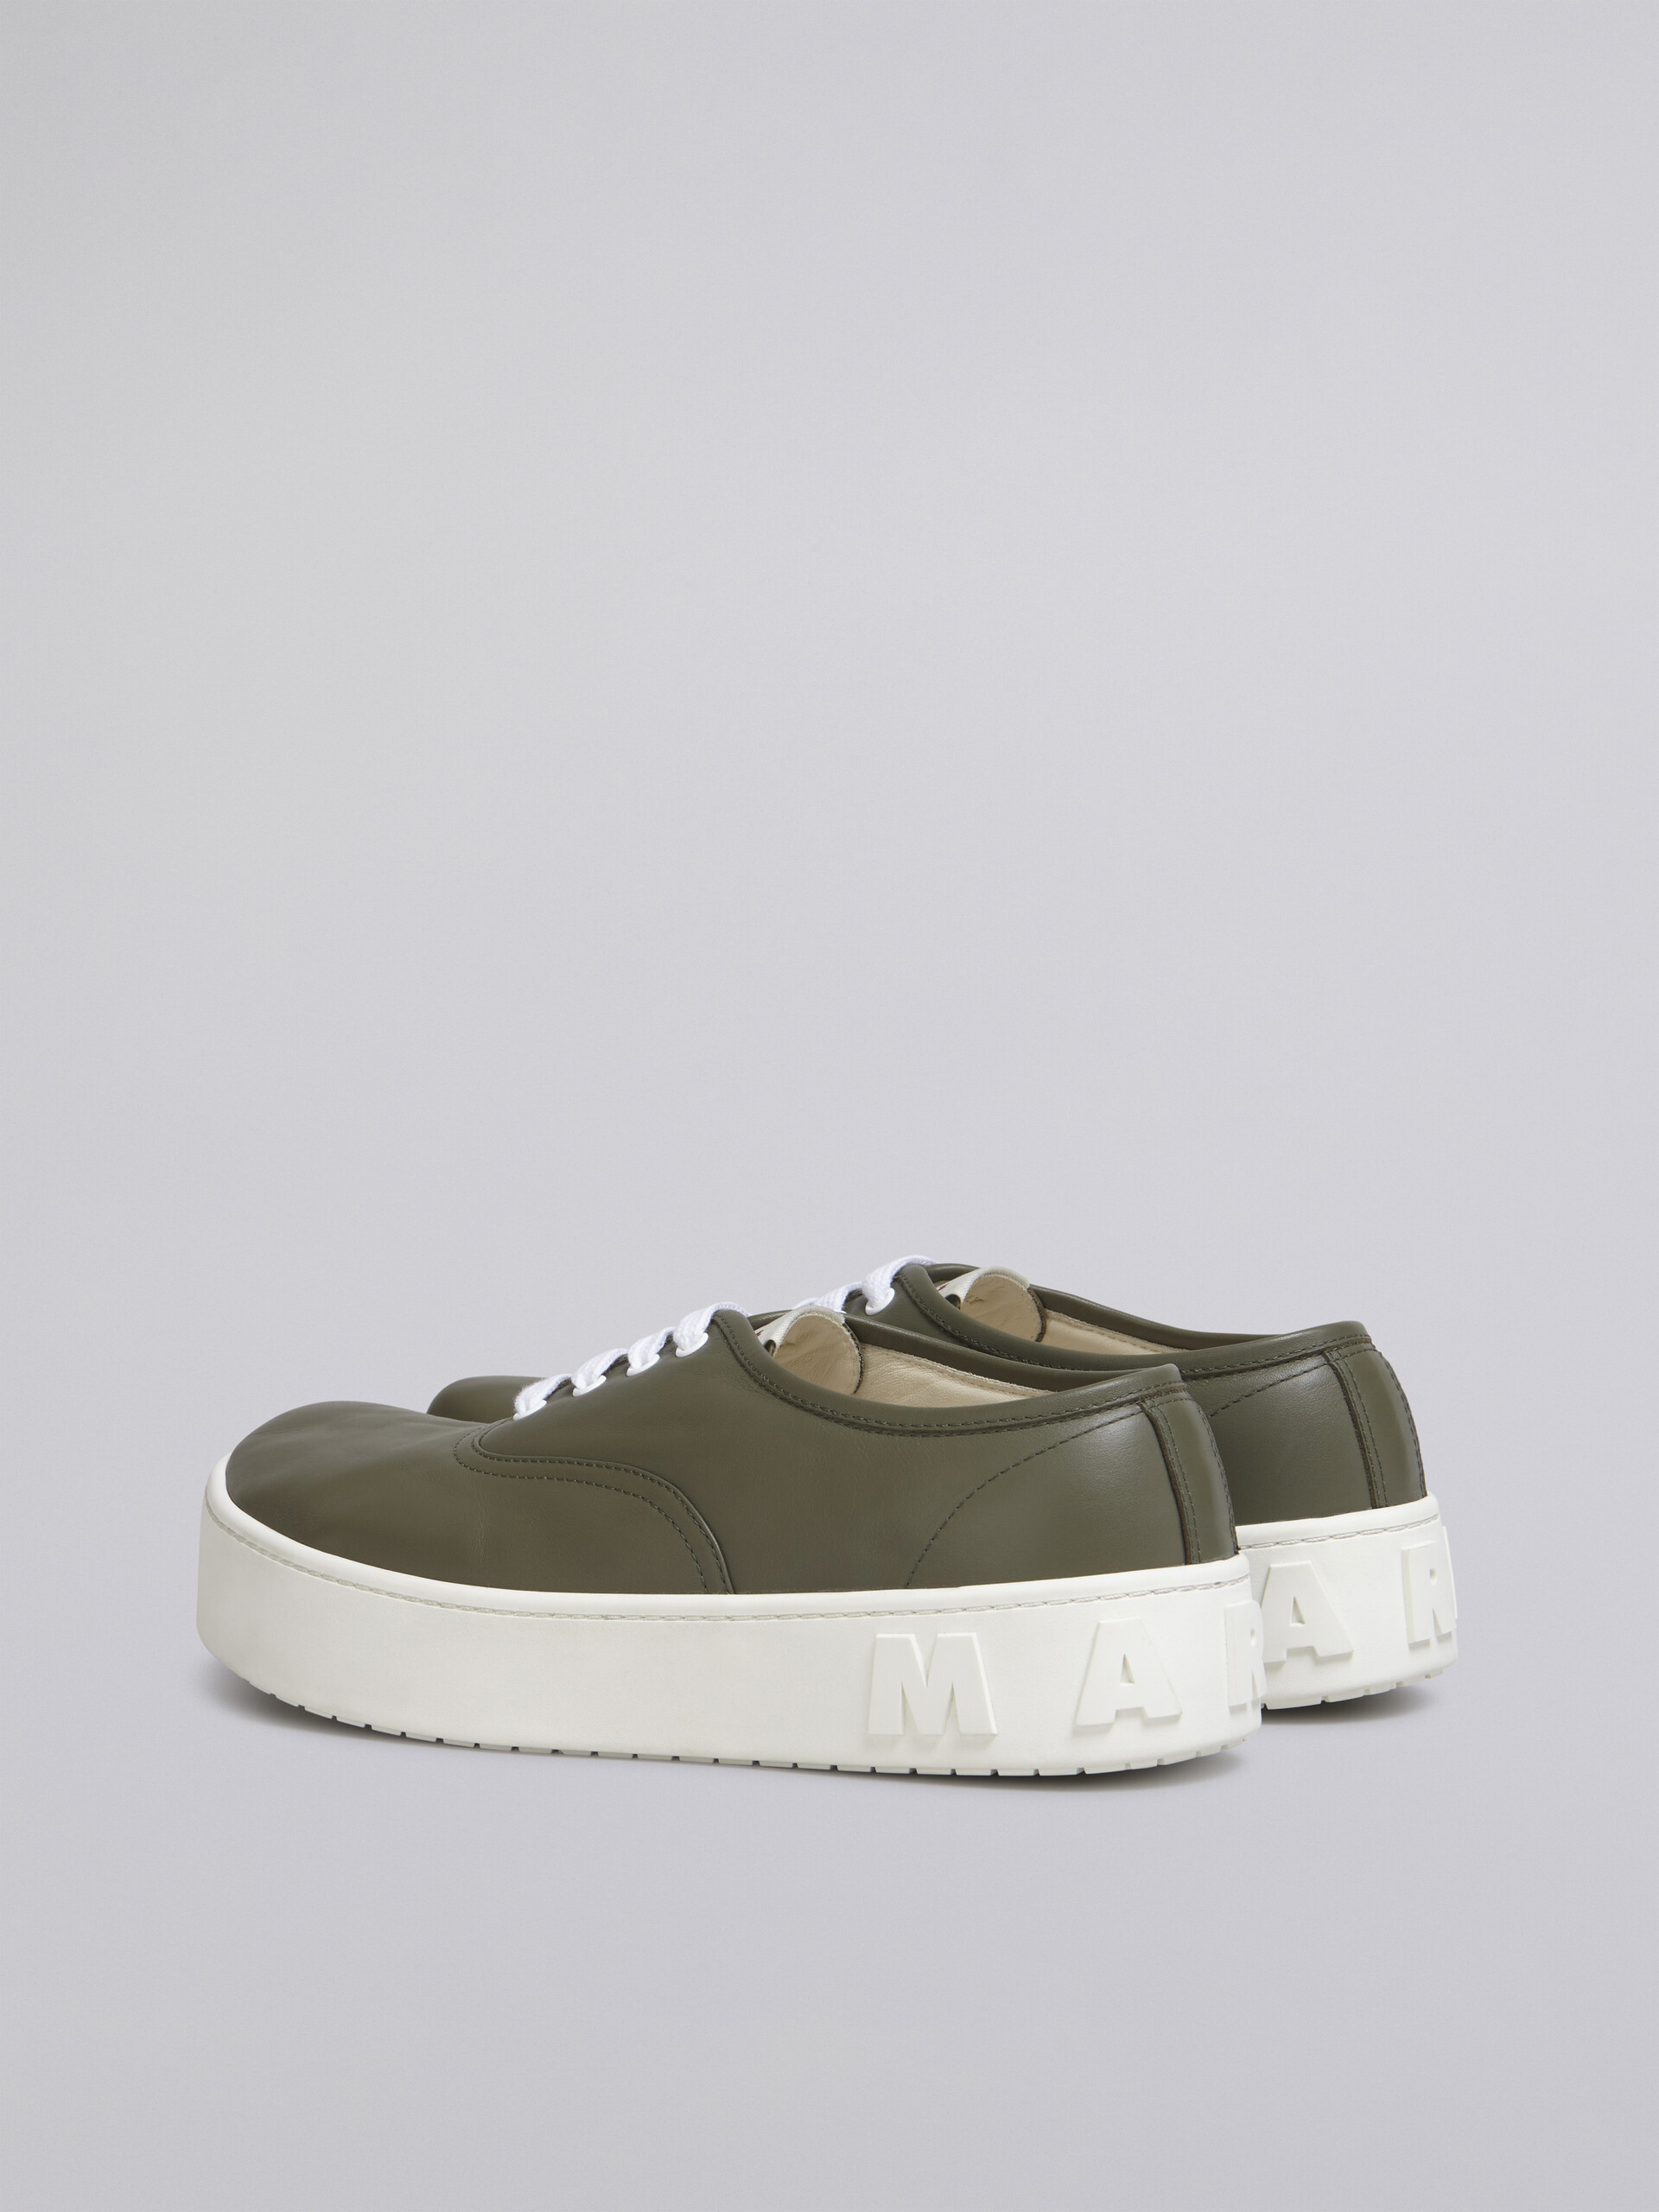 Green leather sneaker with maxi logo - Sneakers - Image 3